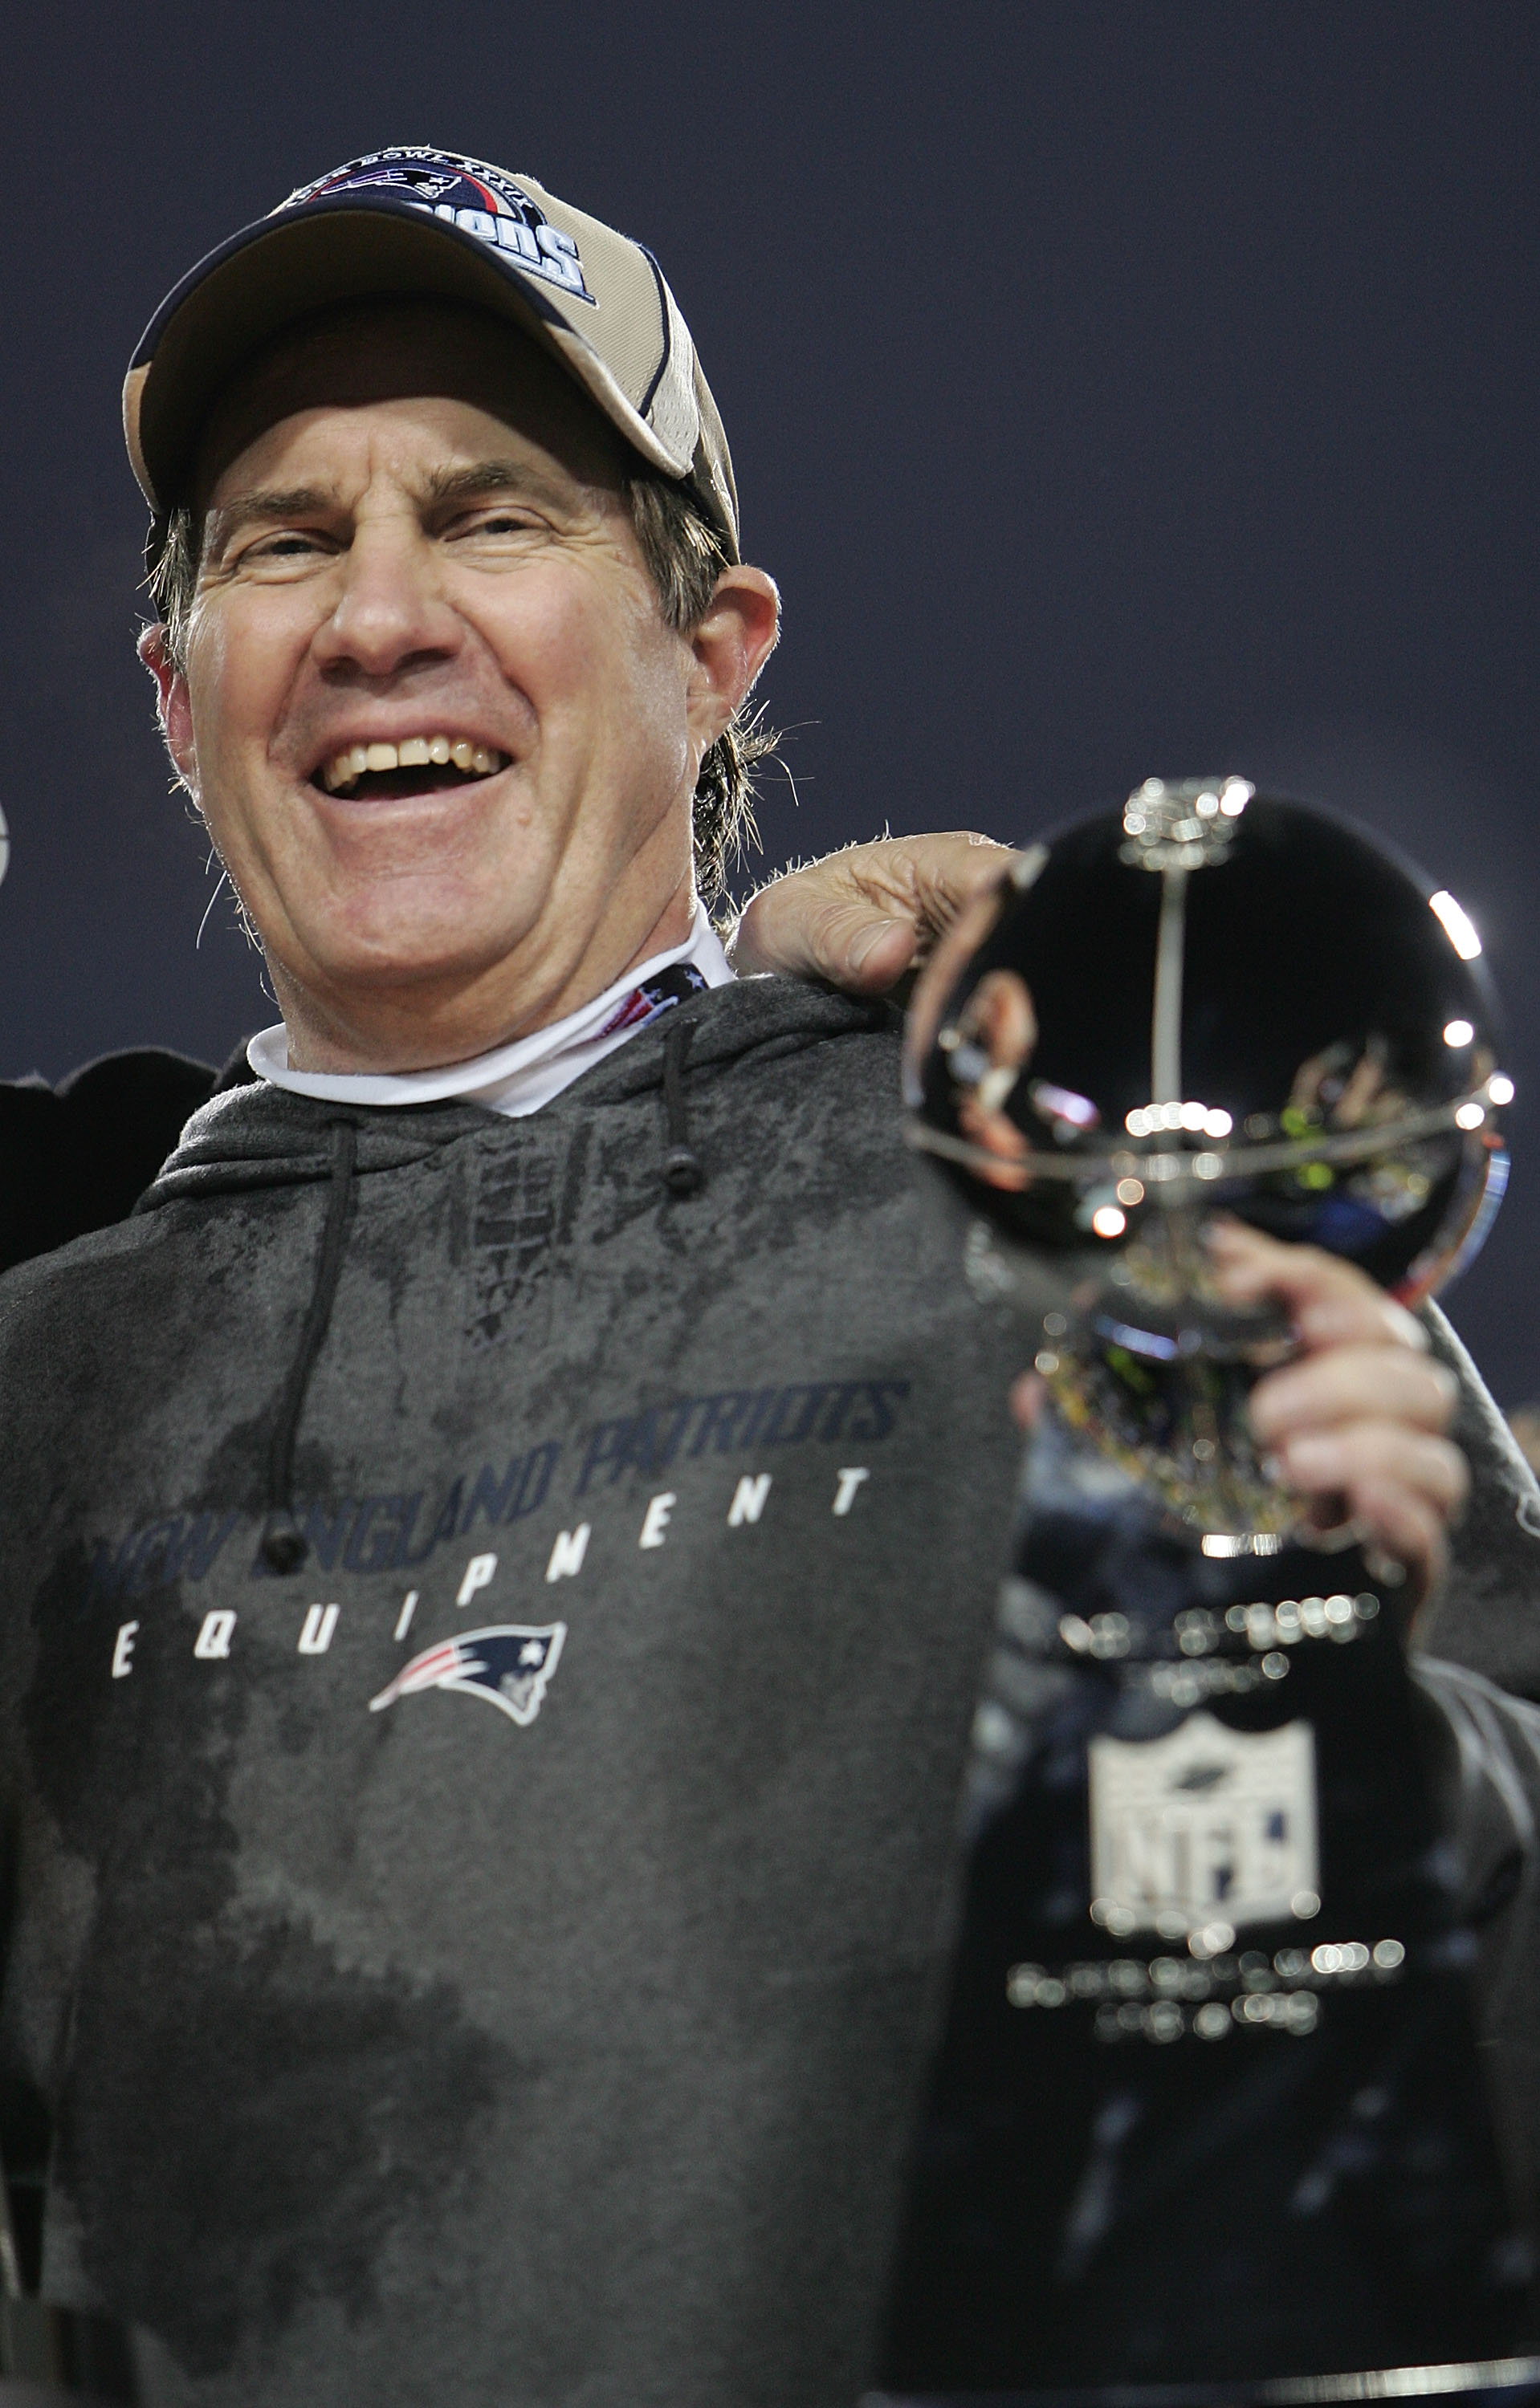 JACKSONVILLE, FLORIDA - FEBRUARY 06:  Head coach Bill Belichick of the New England Patriots celebrates with the Lombardi trophy after defeating the Philadelphia Eagles in Super Bowl XXXIX at Alltel Stadium on February 6, 2005 in Jacksonville, Florida.  Th